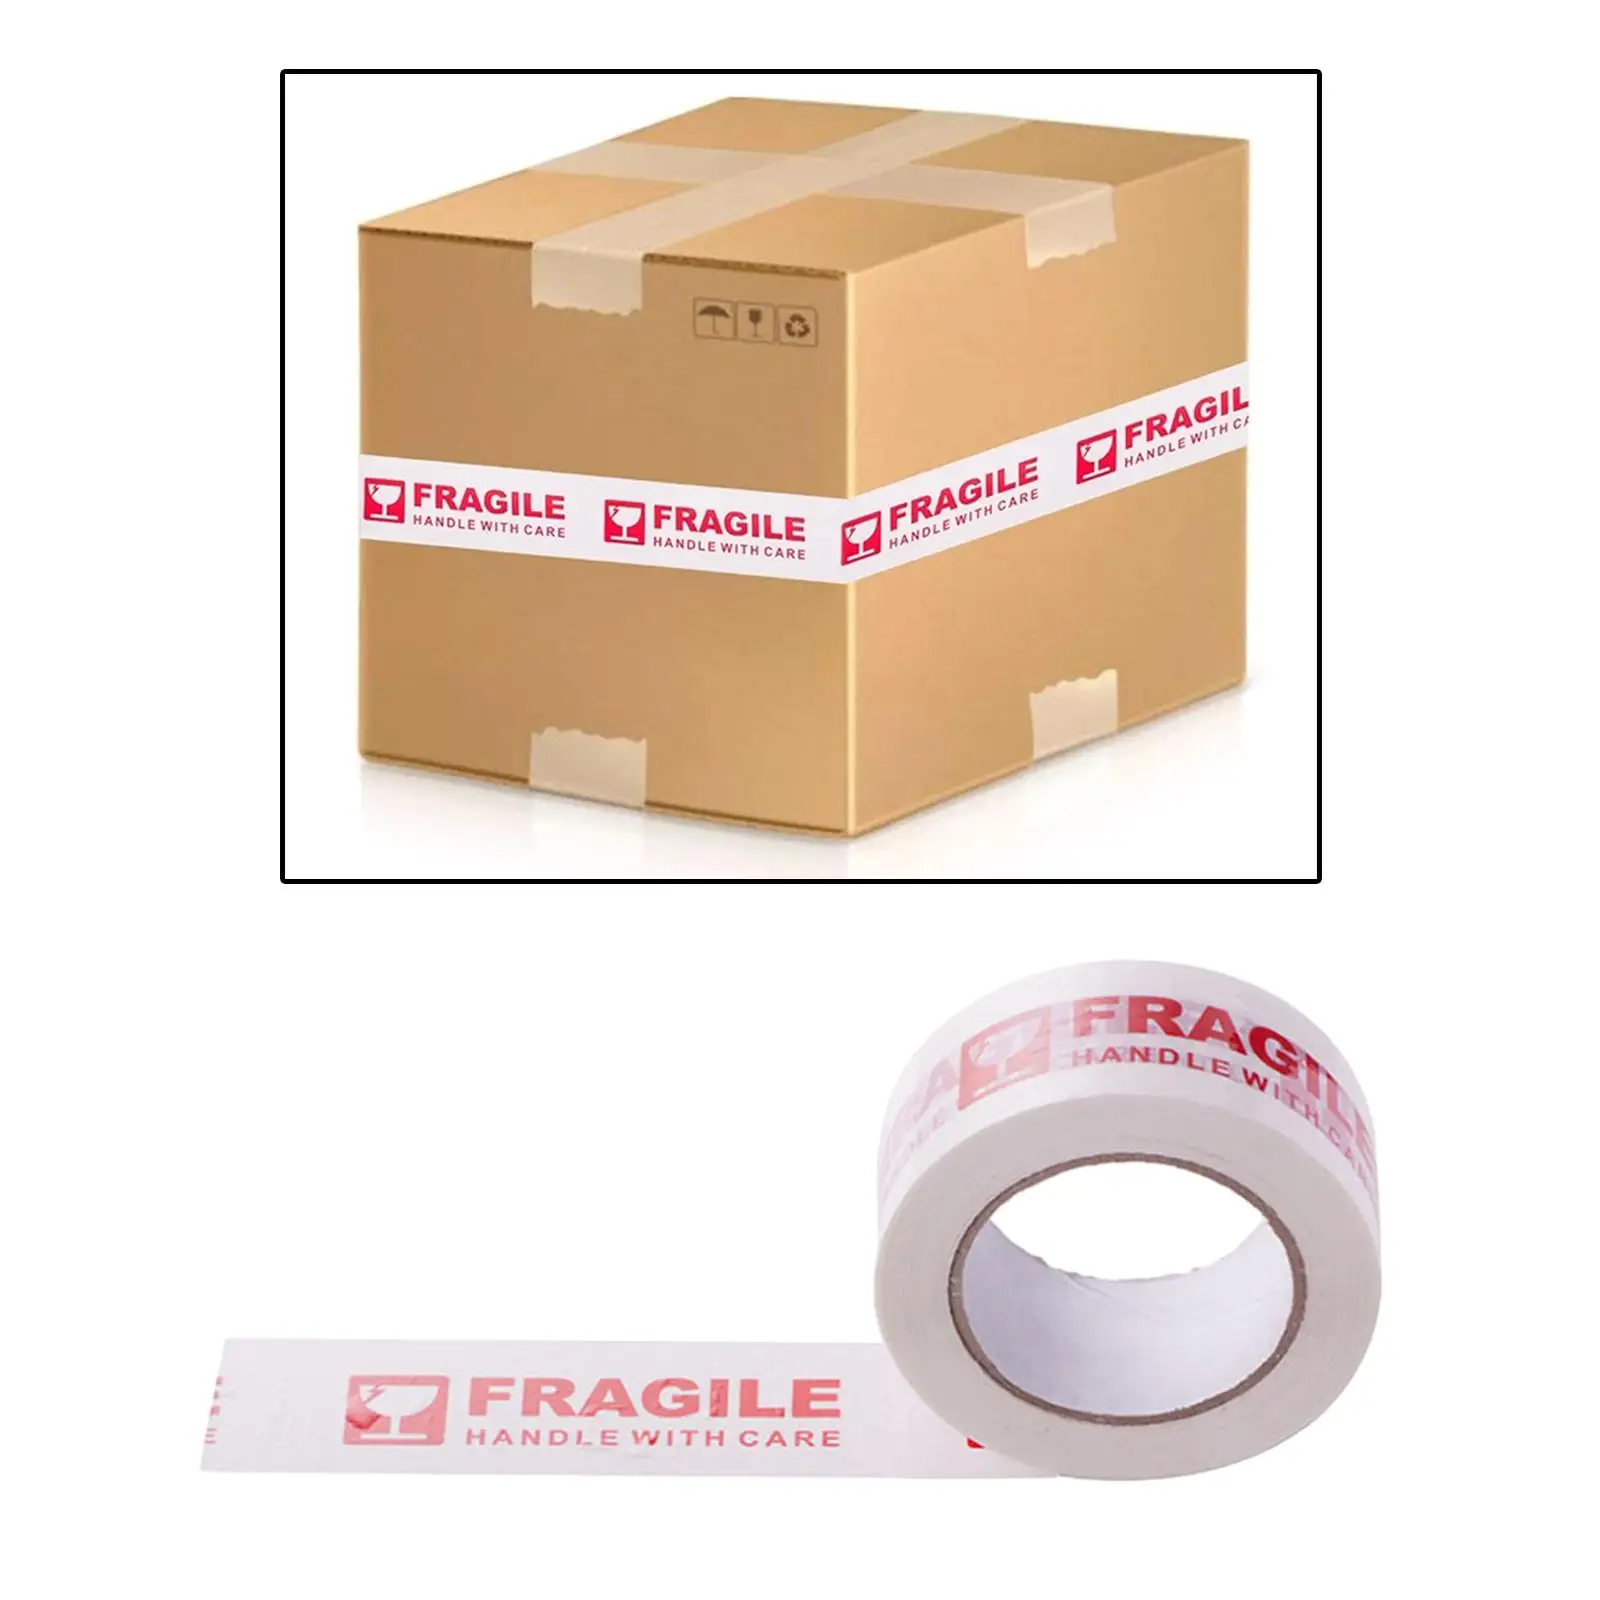 Fragile Handle with Care Packing Tape Strong Adhesive 50mm X 66M for Sealing